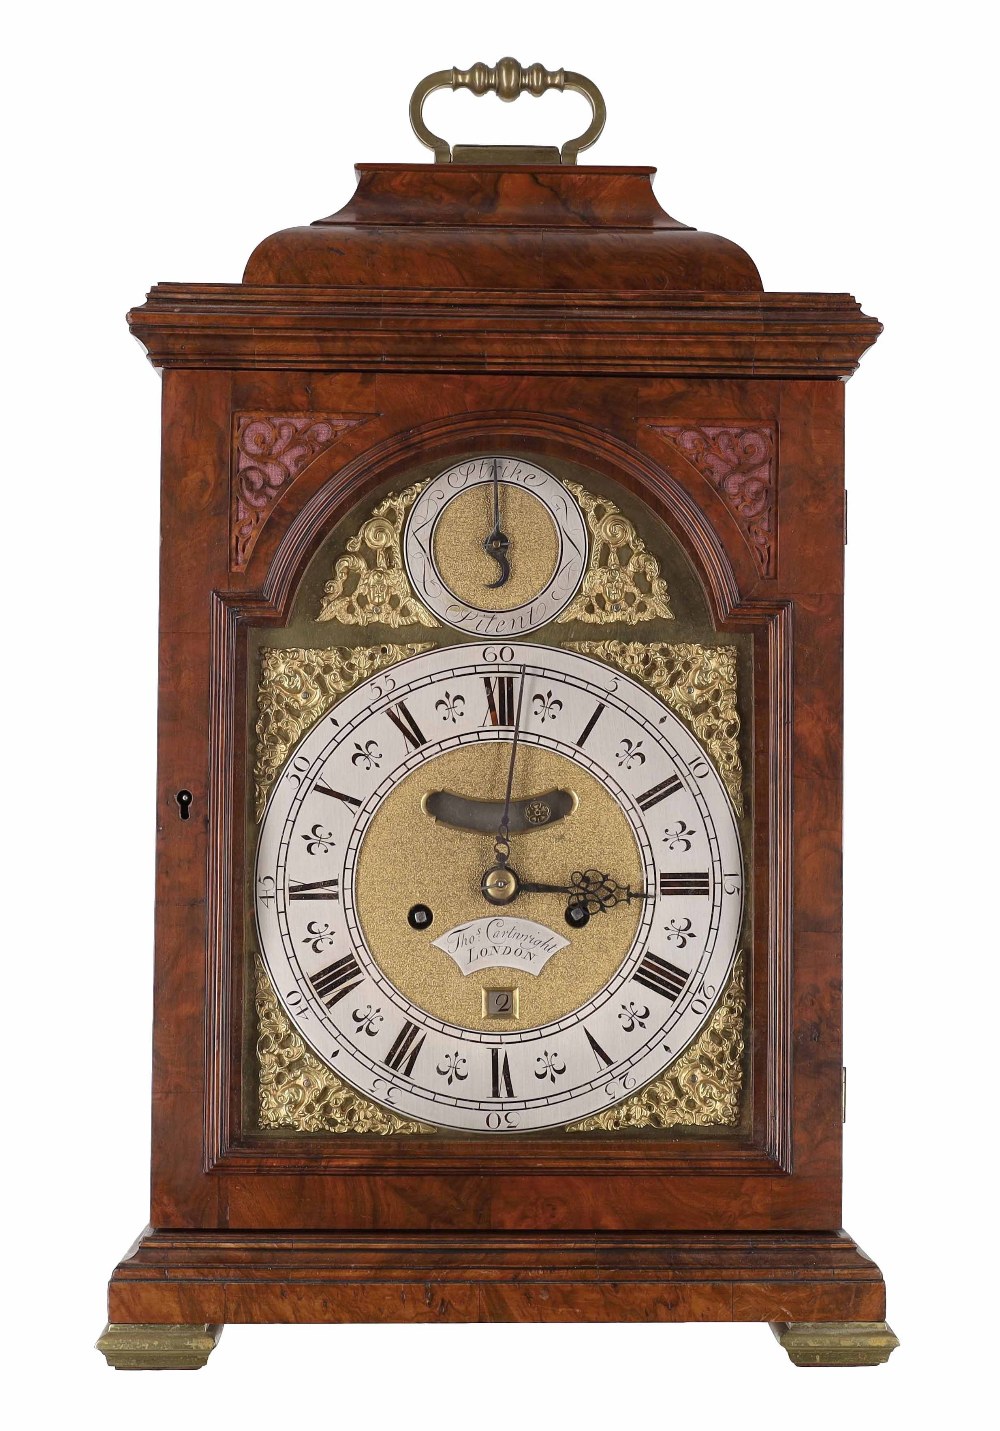 English walnut double fusee verge bracket clock, signed Thomas Cartwright, London on an arched